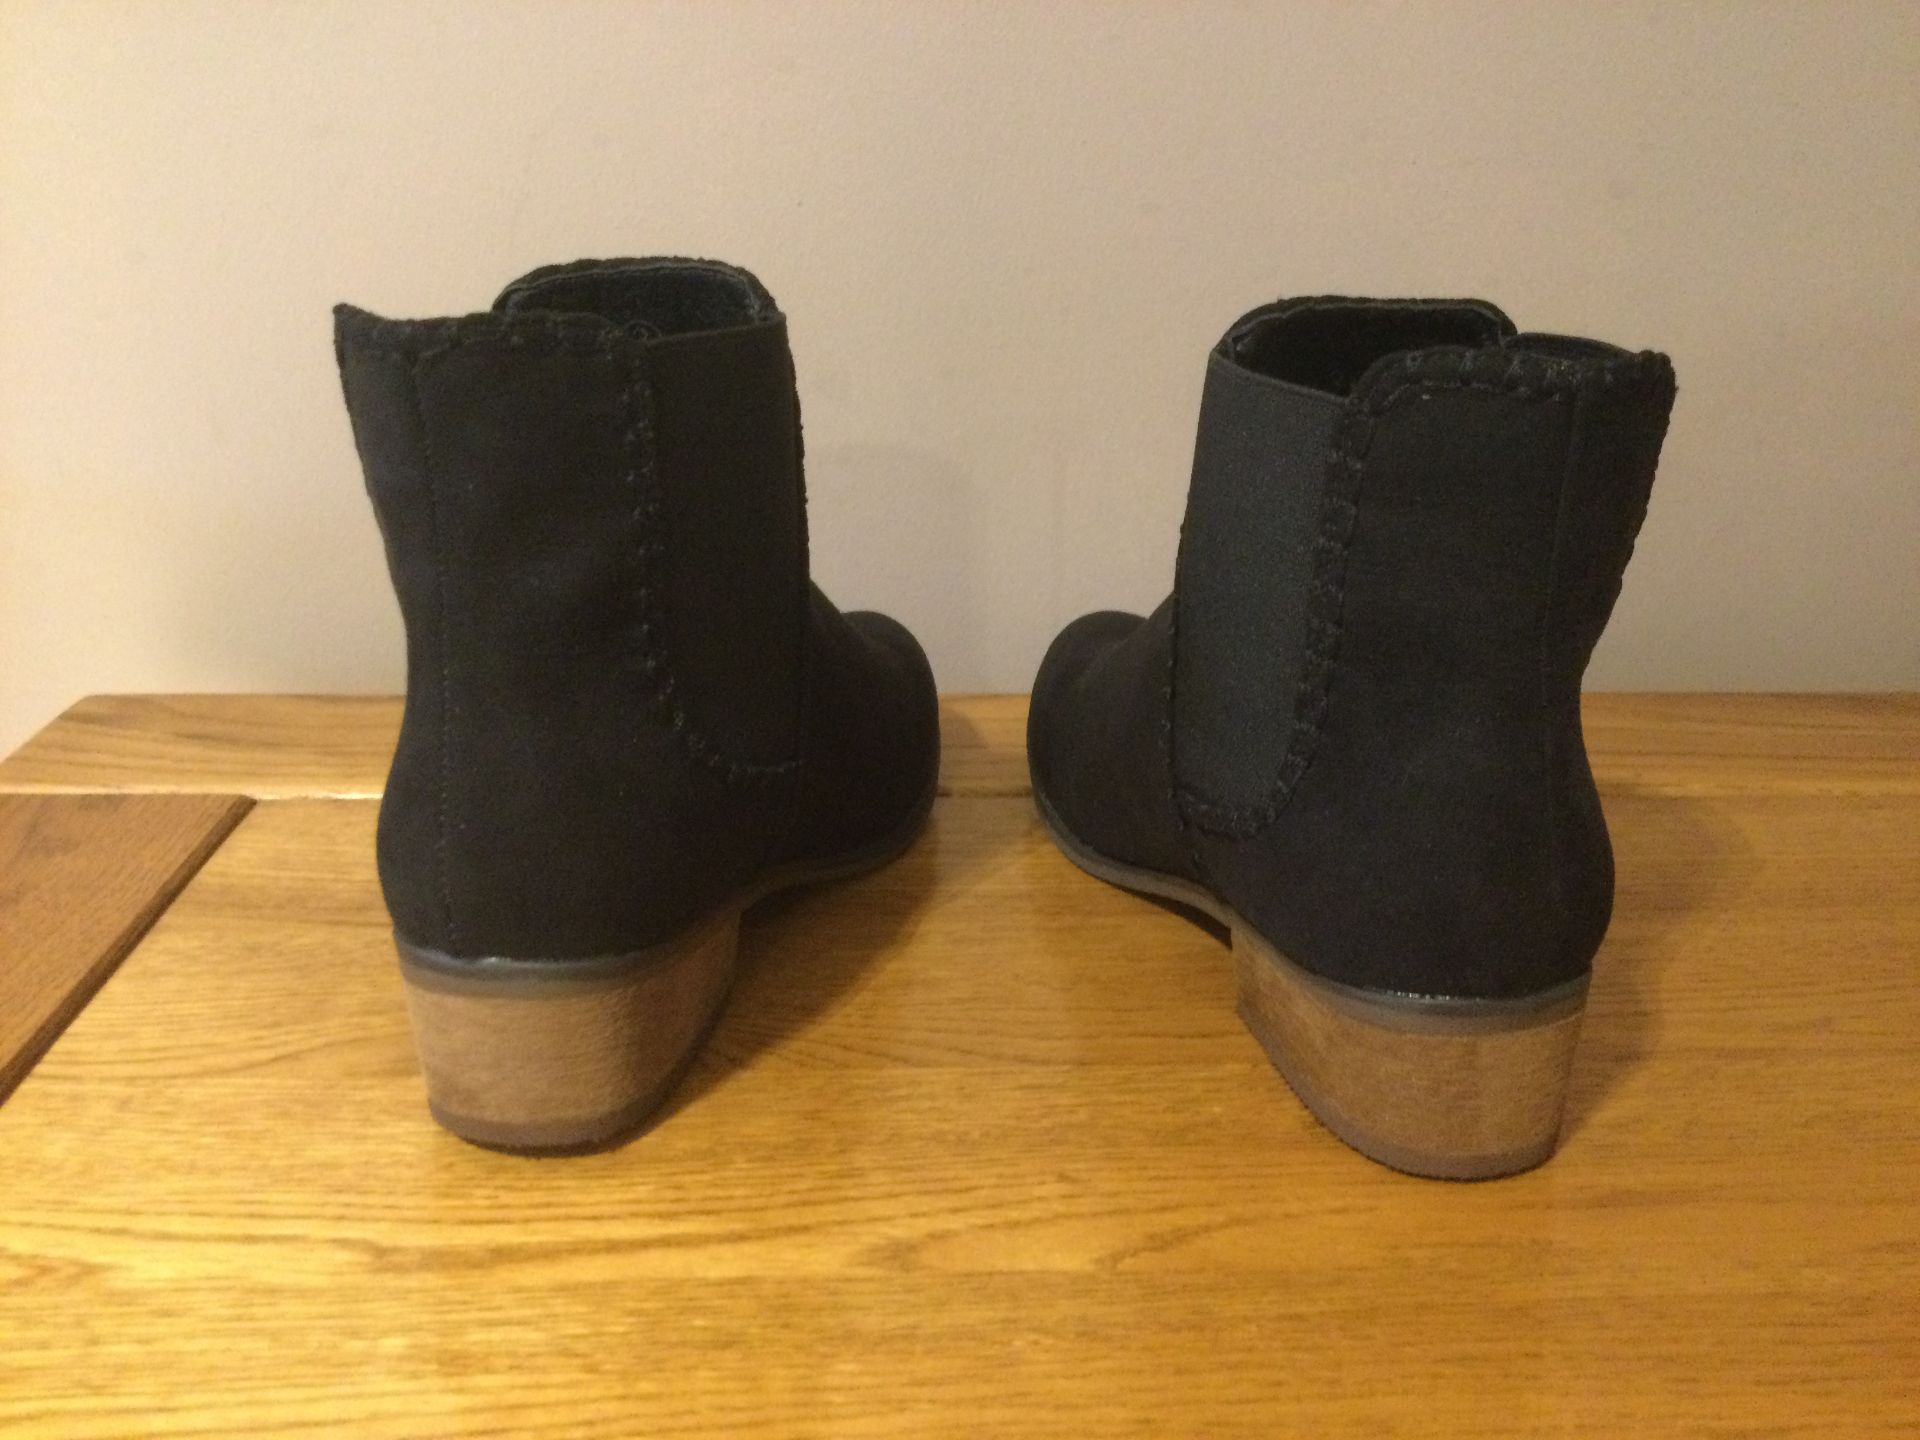 Dolcis “Pasha” Low Heel Ankle Boots, Size 5, Black - New RRP £45.99 - Image 4 of 6